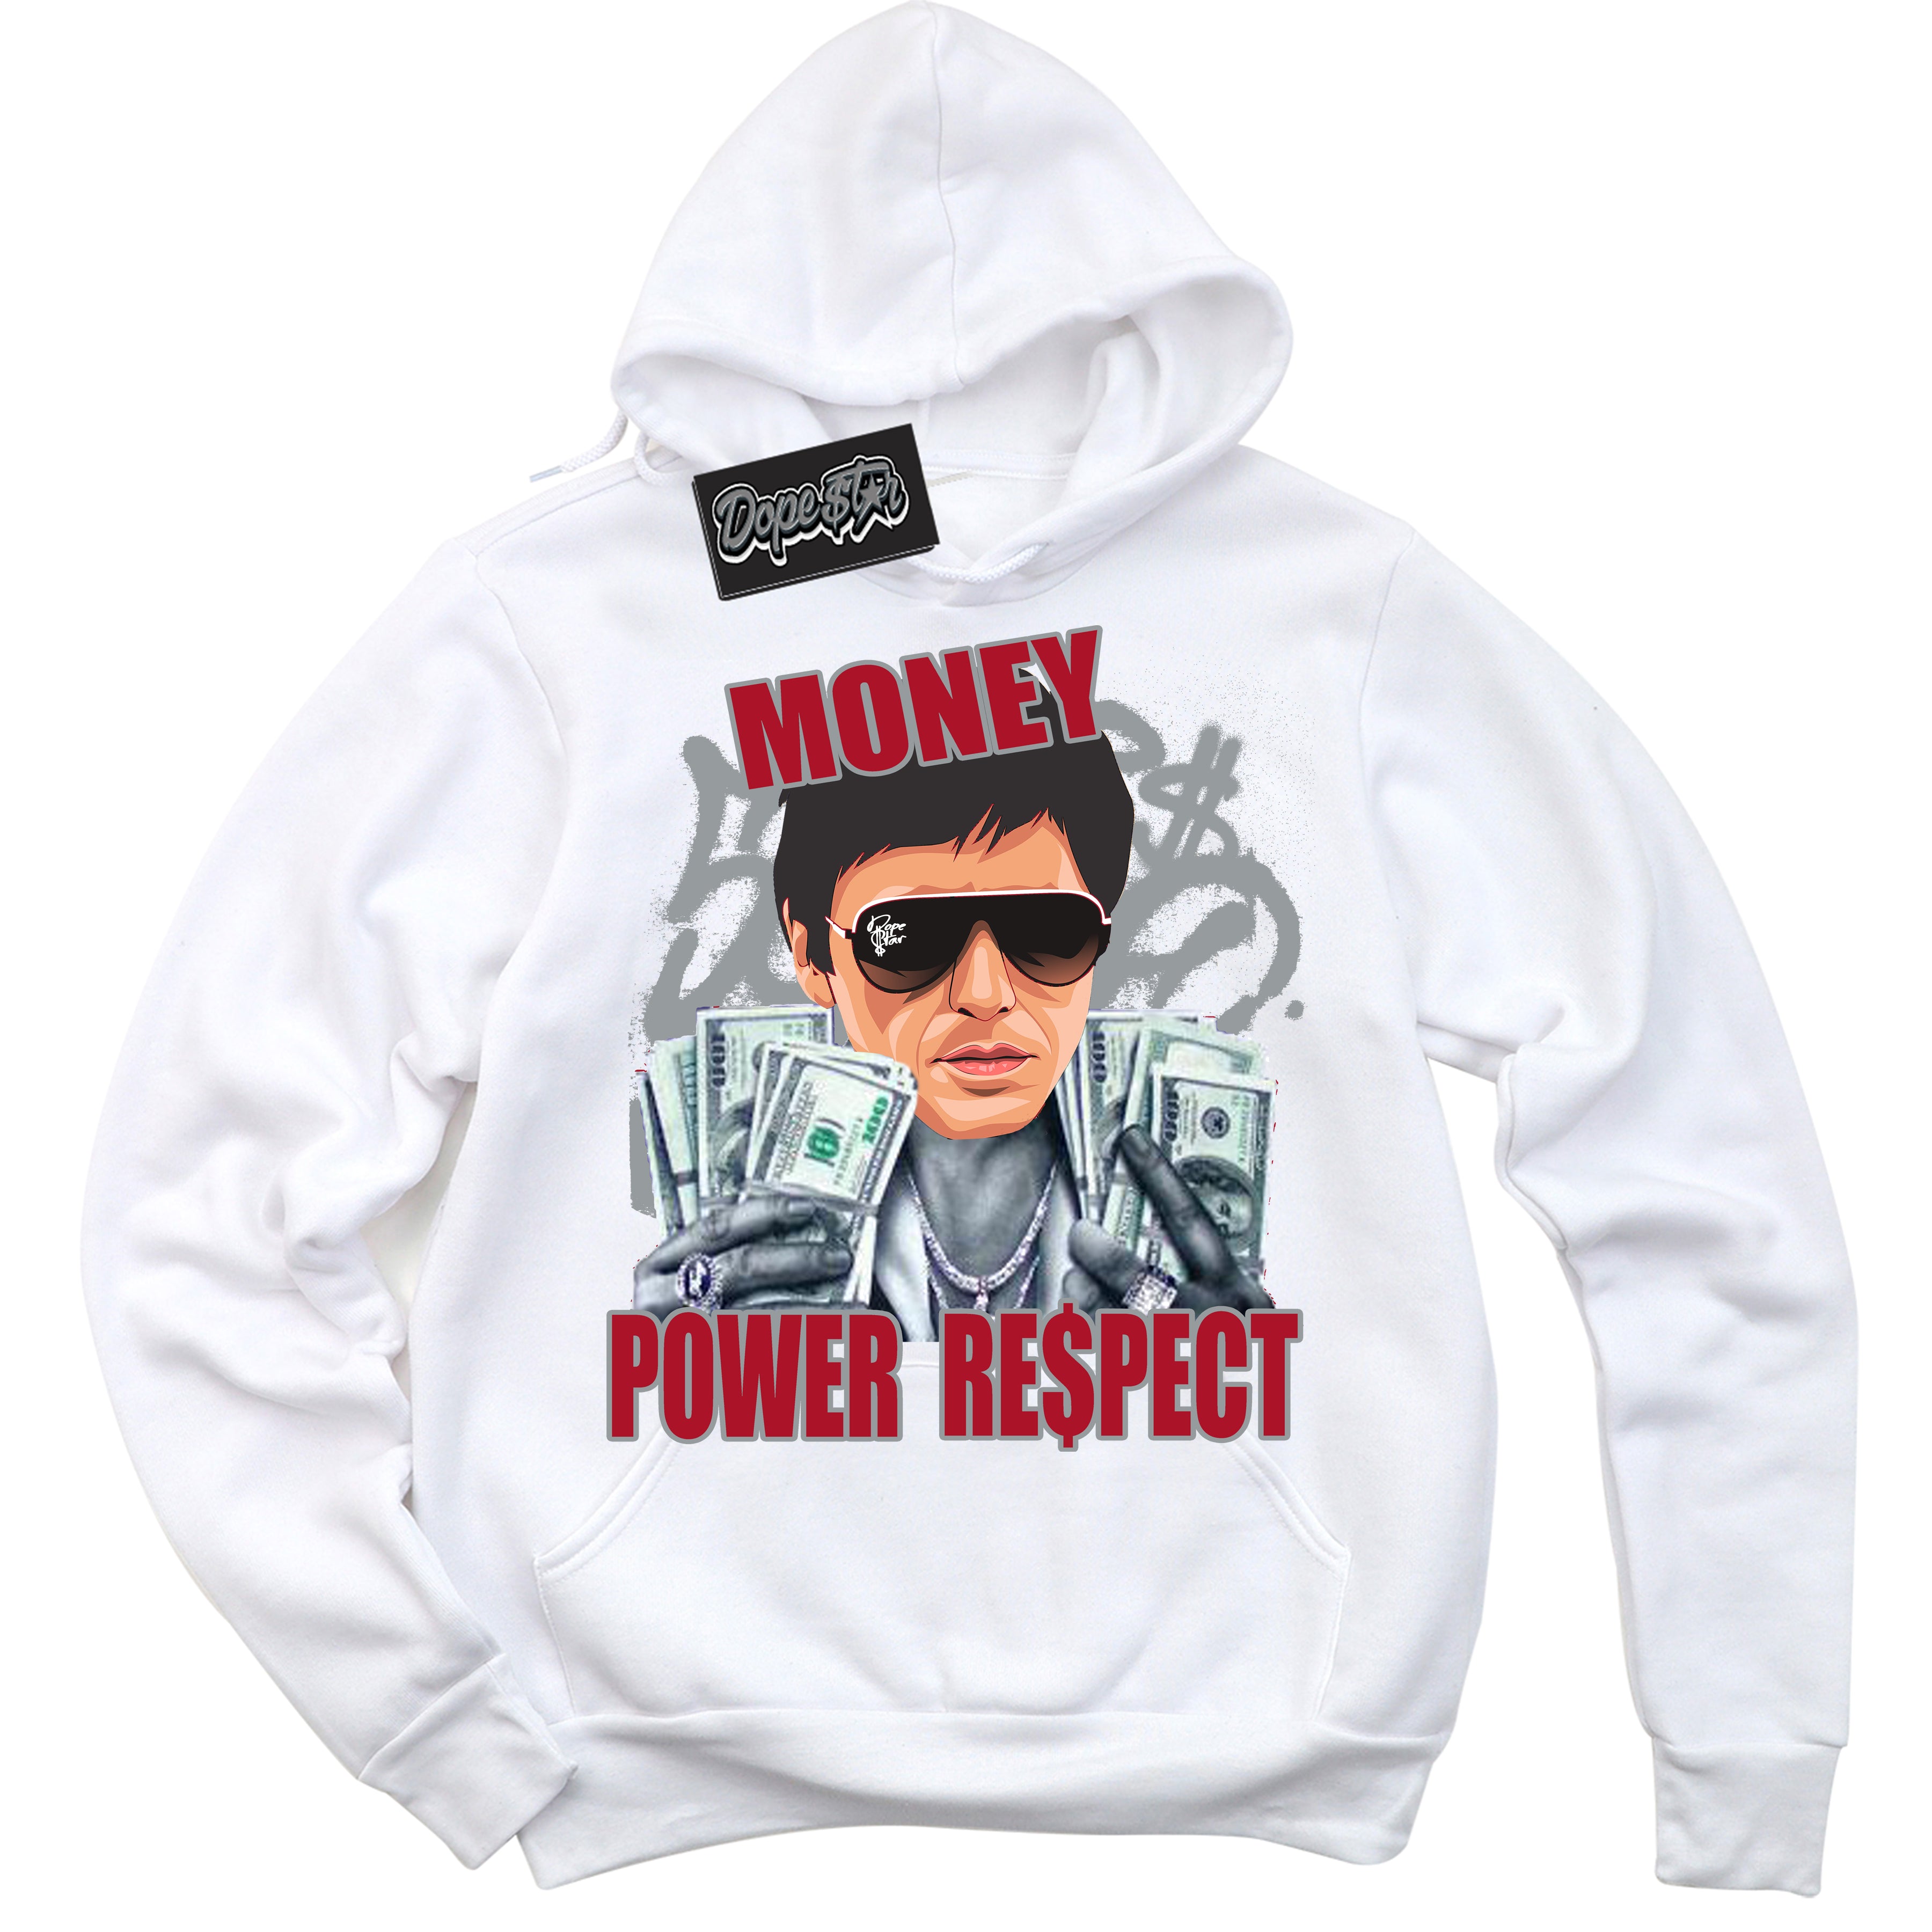 Cool White Hoodie with “ Tony Montana ”  design that Perfectly Matches  Reverse Ultraman Sneakers.